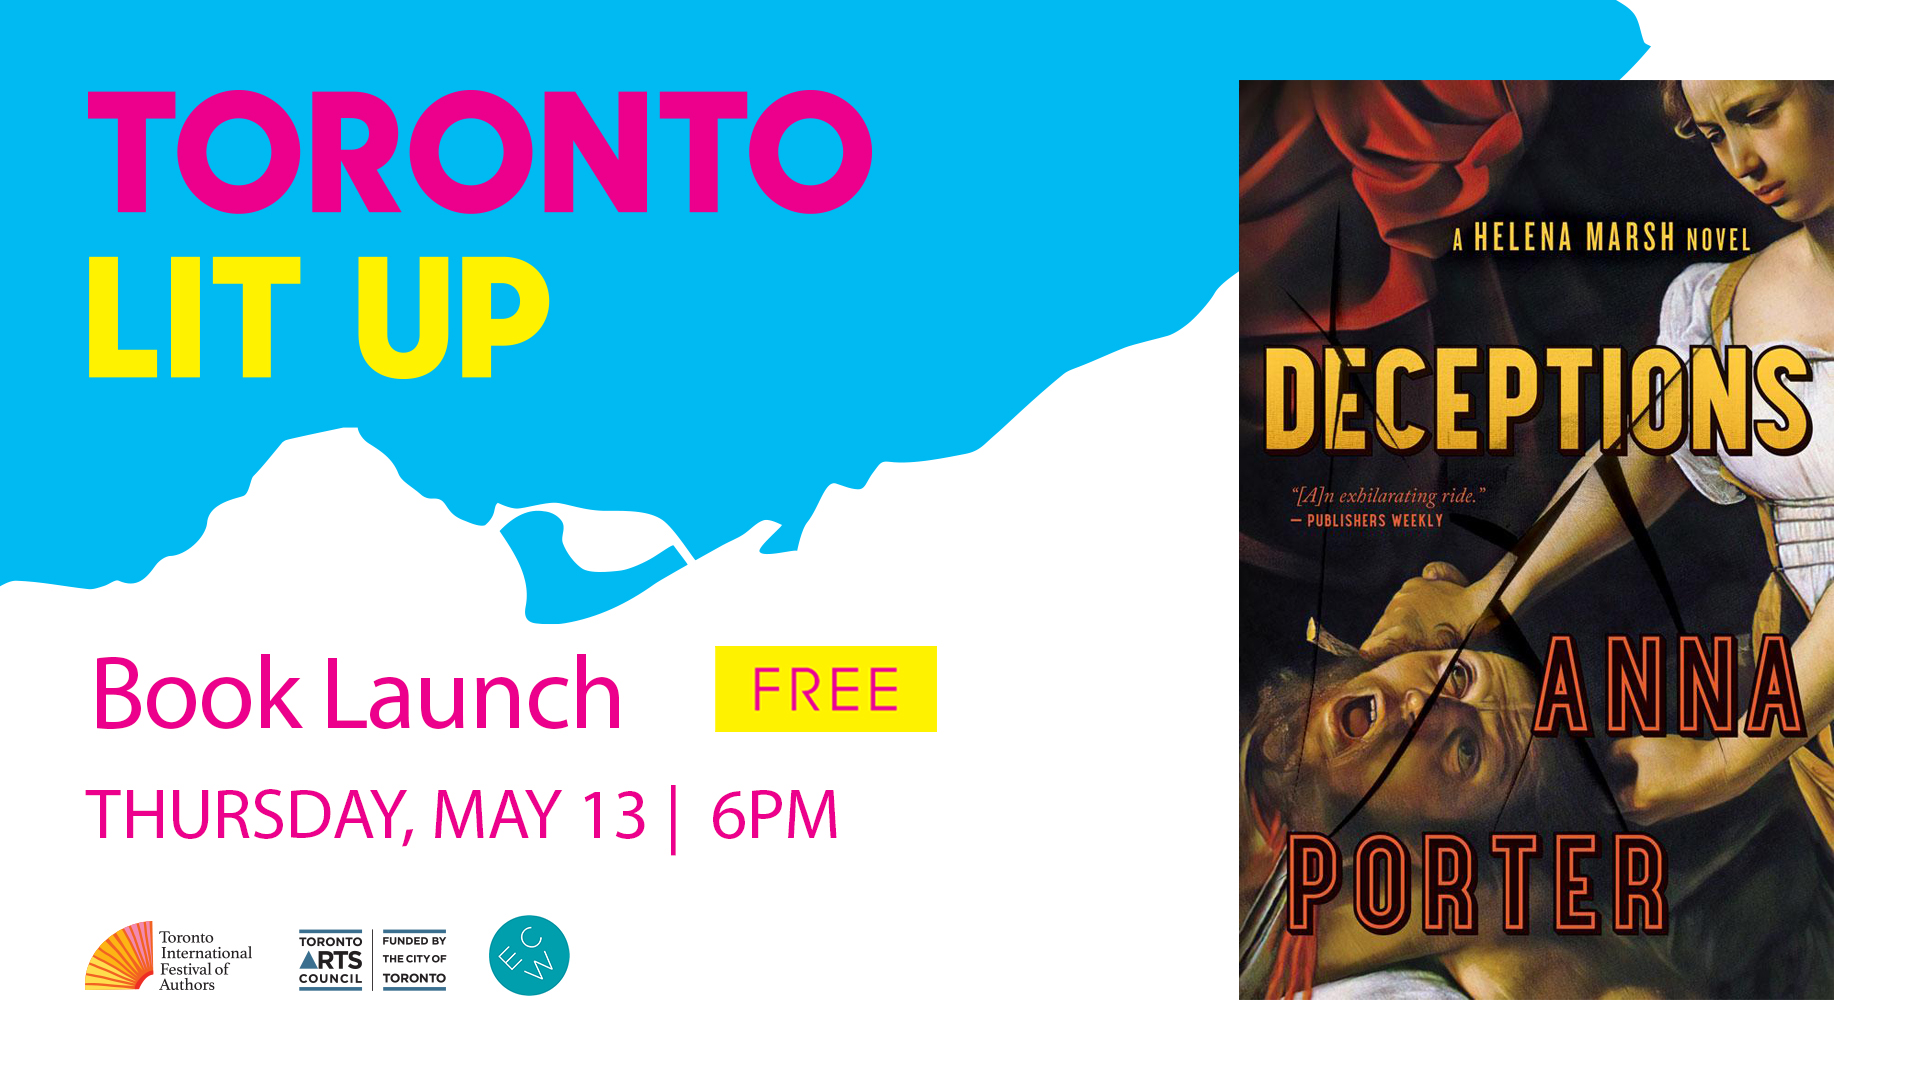 Toronto Lit Up banner with the book cover of Deceptions and "Book Launch Free Thursday May 13 6pm". Includes TIFA, Toronto Arts Council and ECW Press logos